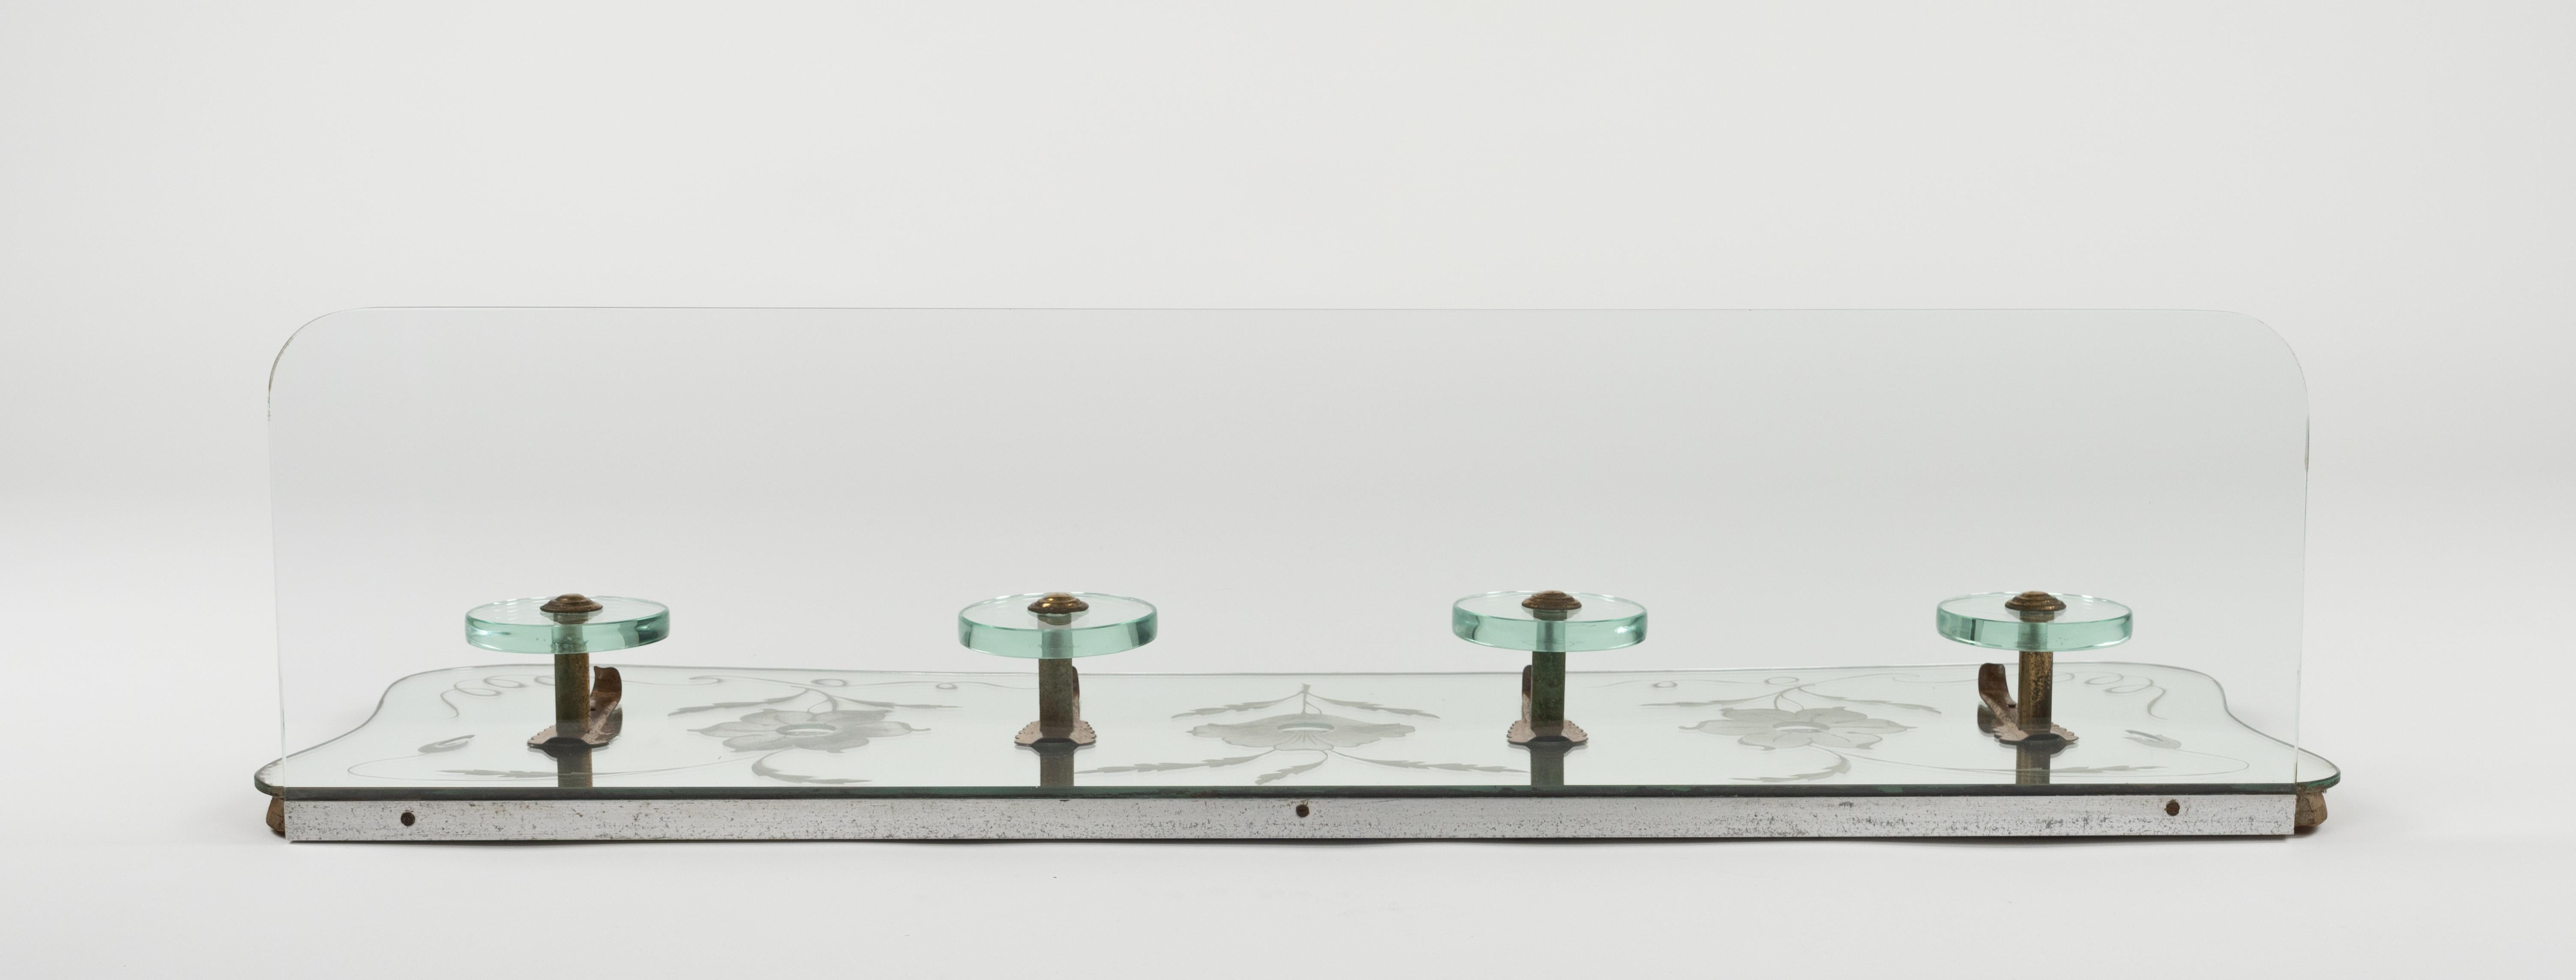 Midcentury Coat Rack Shelf in Mirror, Brass & Glass by Cristal Art, Italy, 1950s For Sale 11